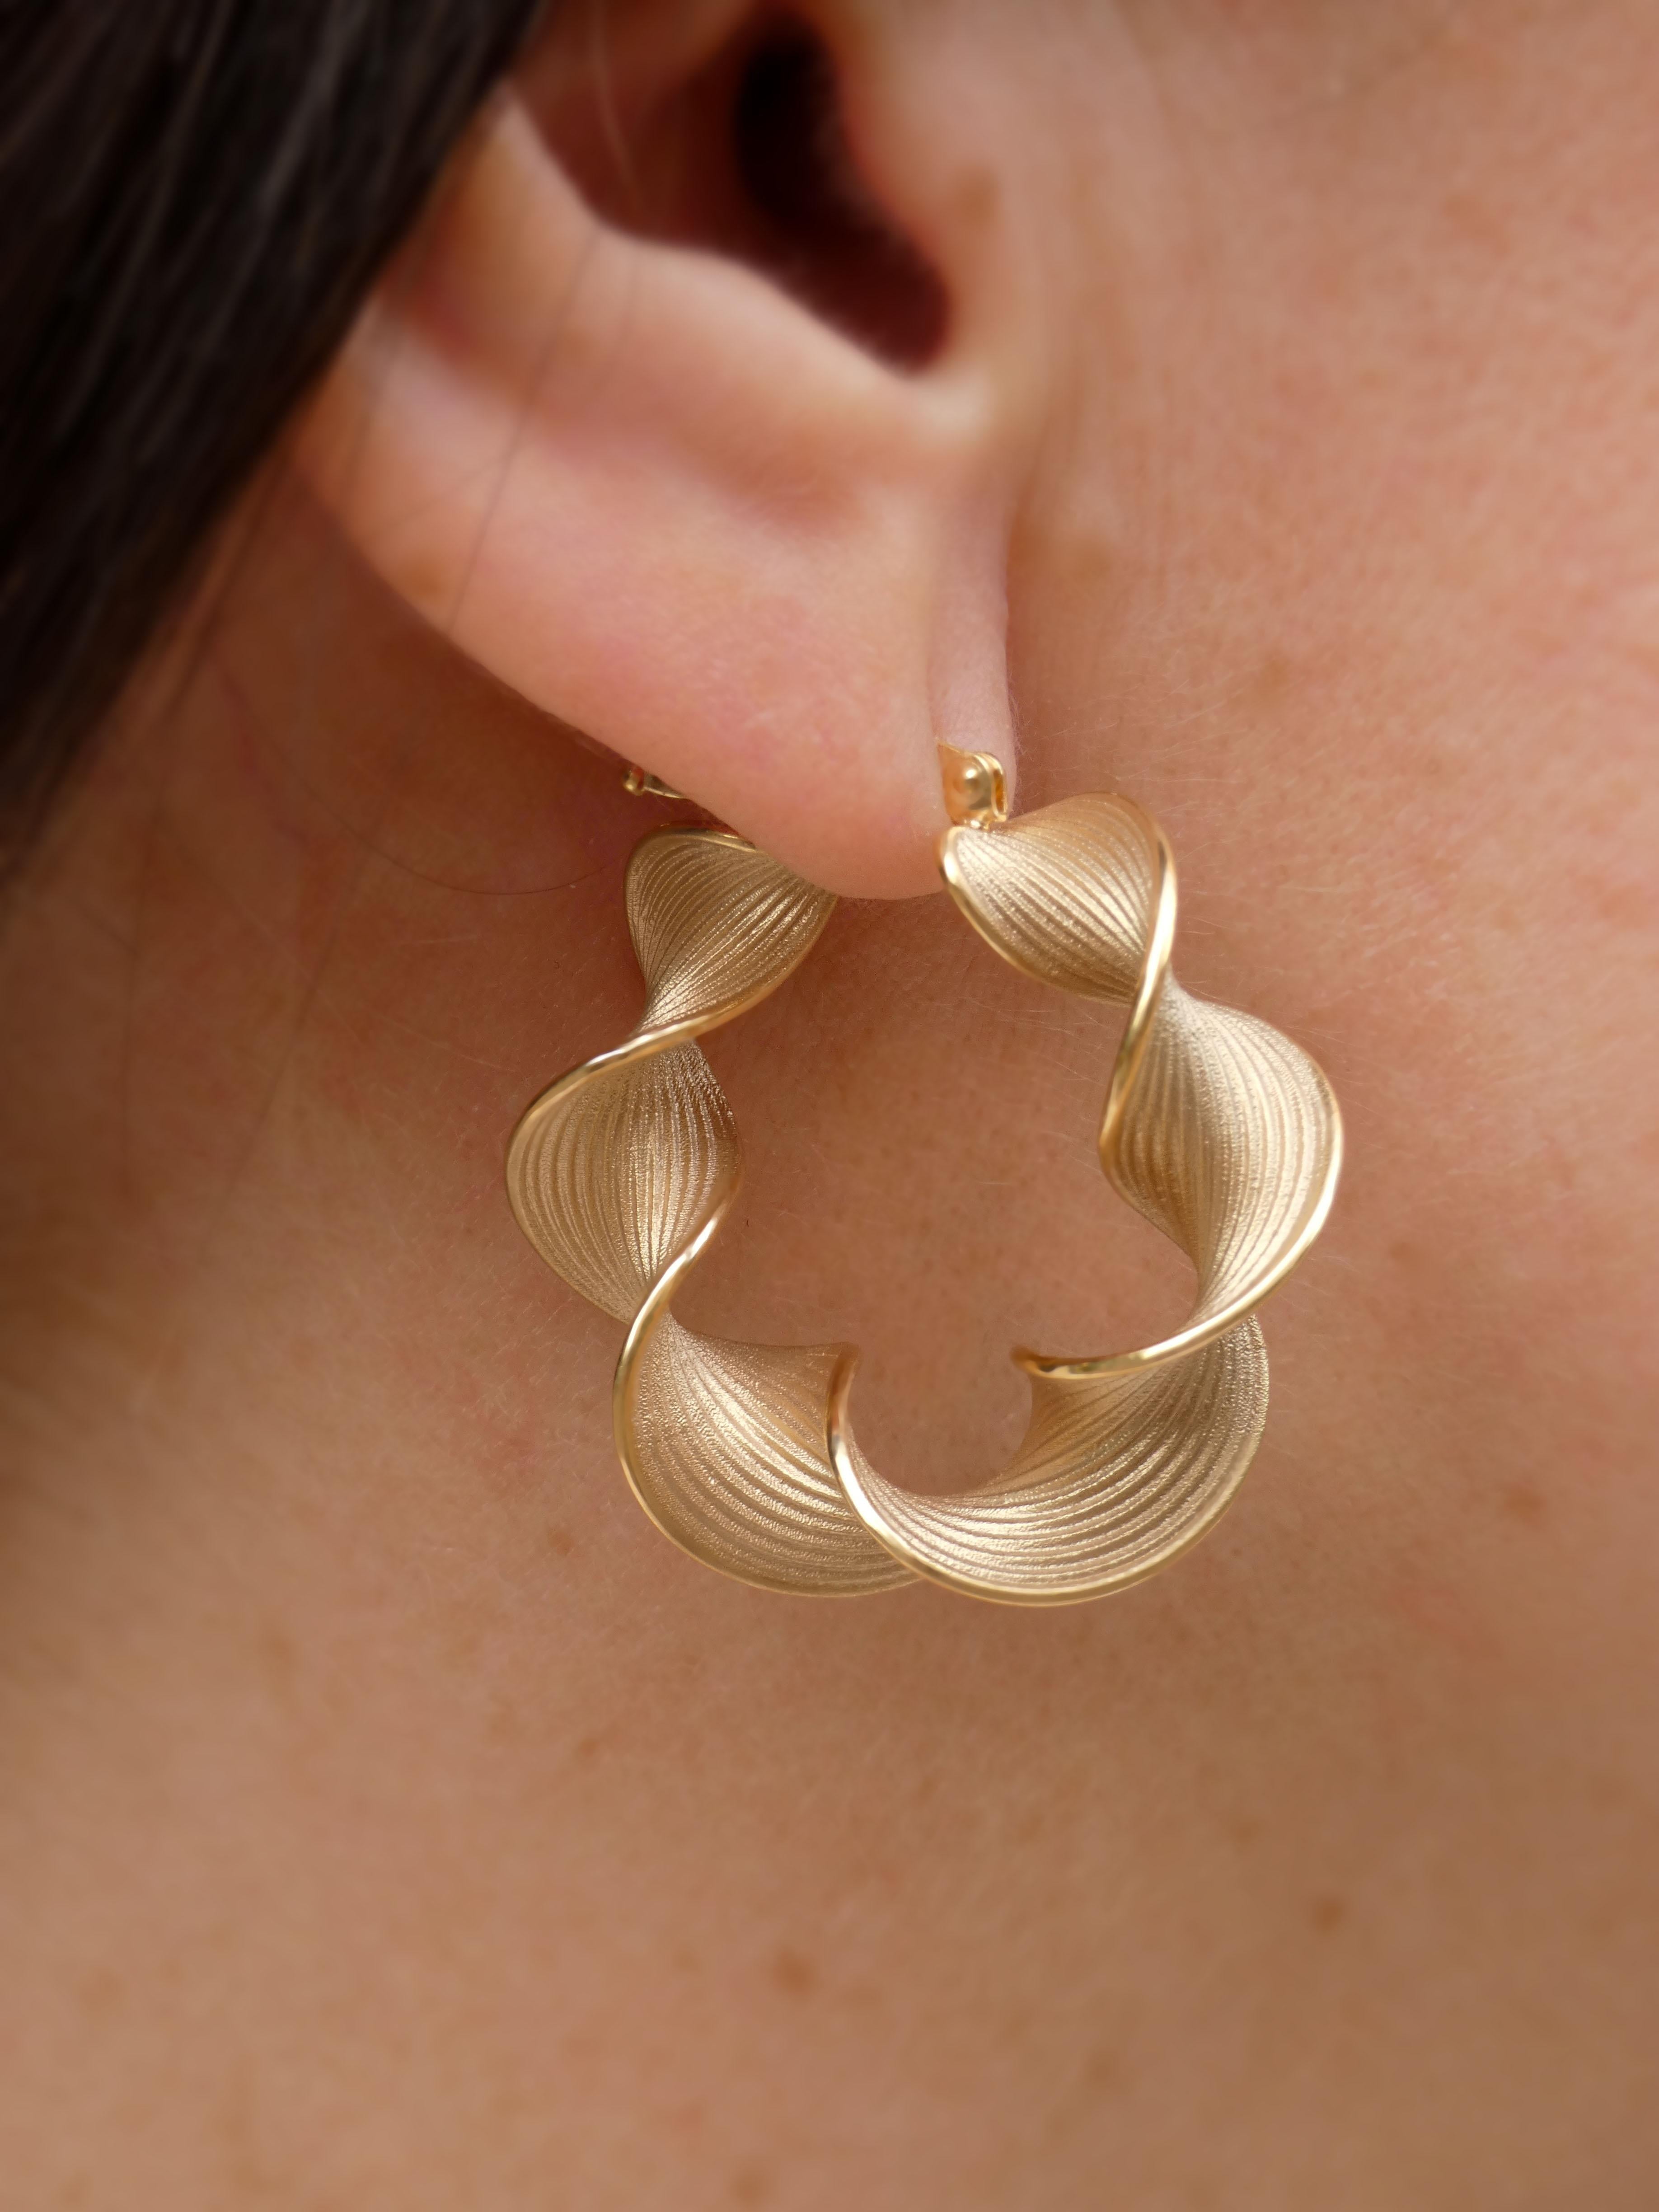 18k Twisted Gold Hoop Earrings Designed and Crafted in Italy In New Condition For Sale In Camisano Vicentino, VI